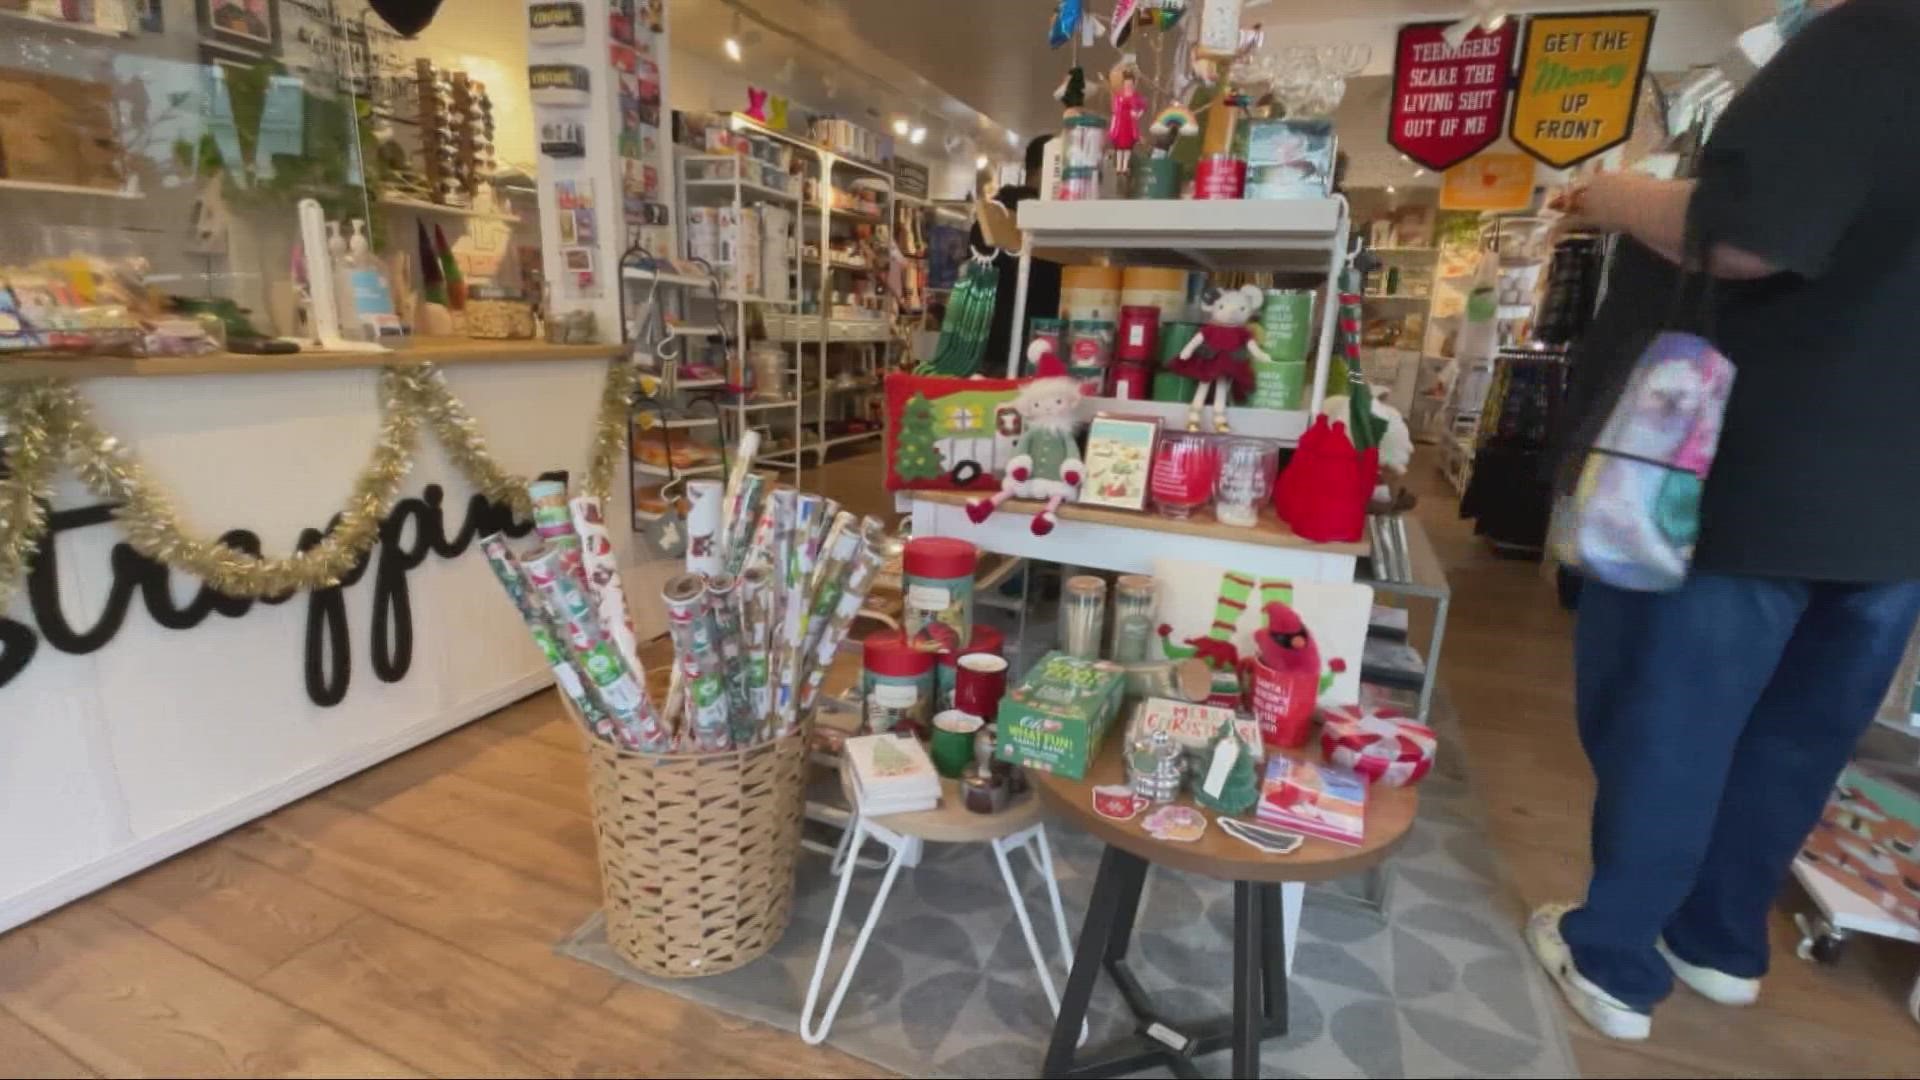 Small Business Saturday encourages people to shop at local businesses.